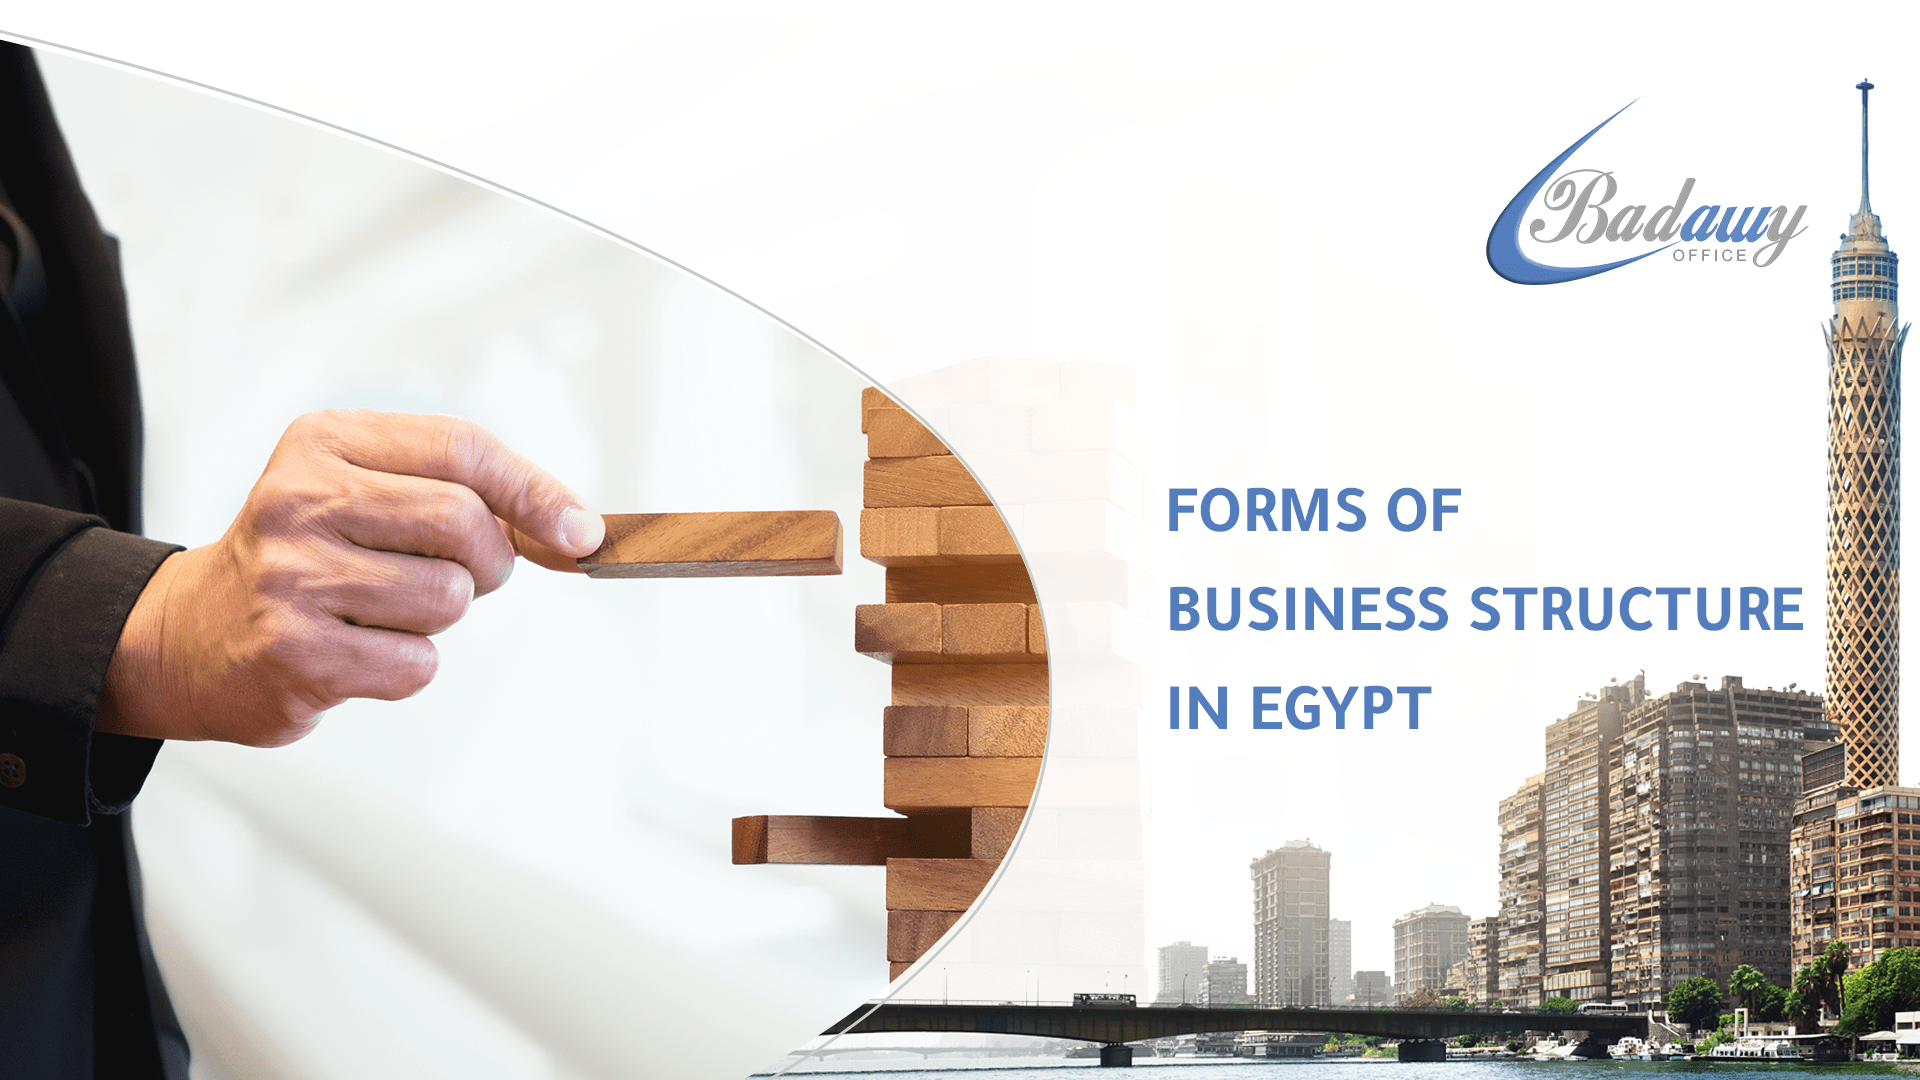 Forms of Business Structure in Egypt